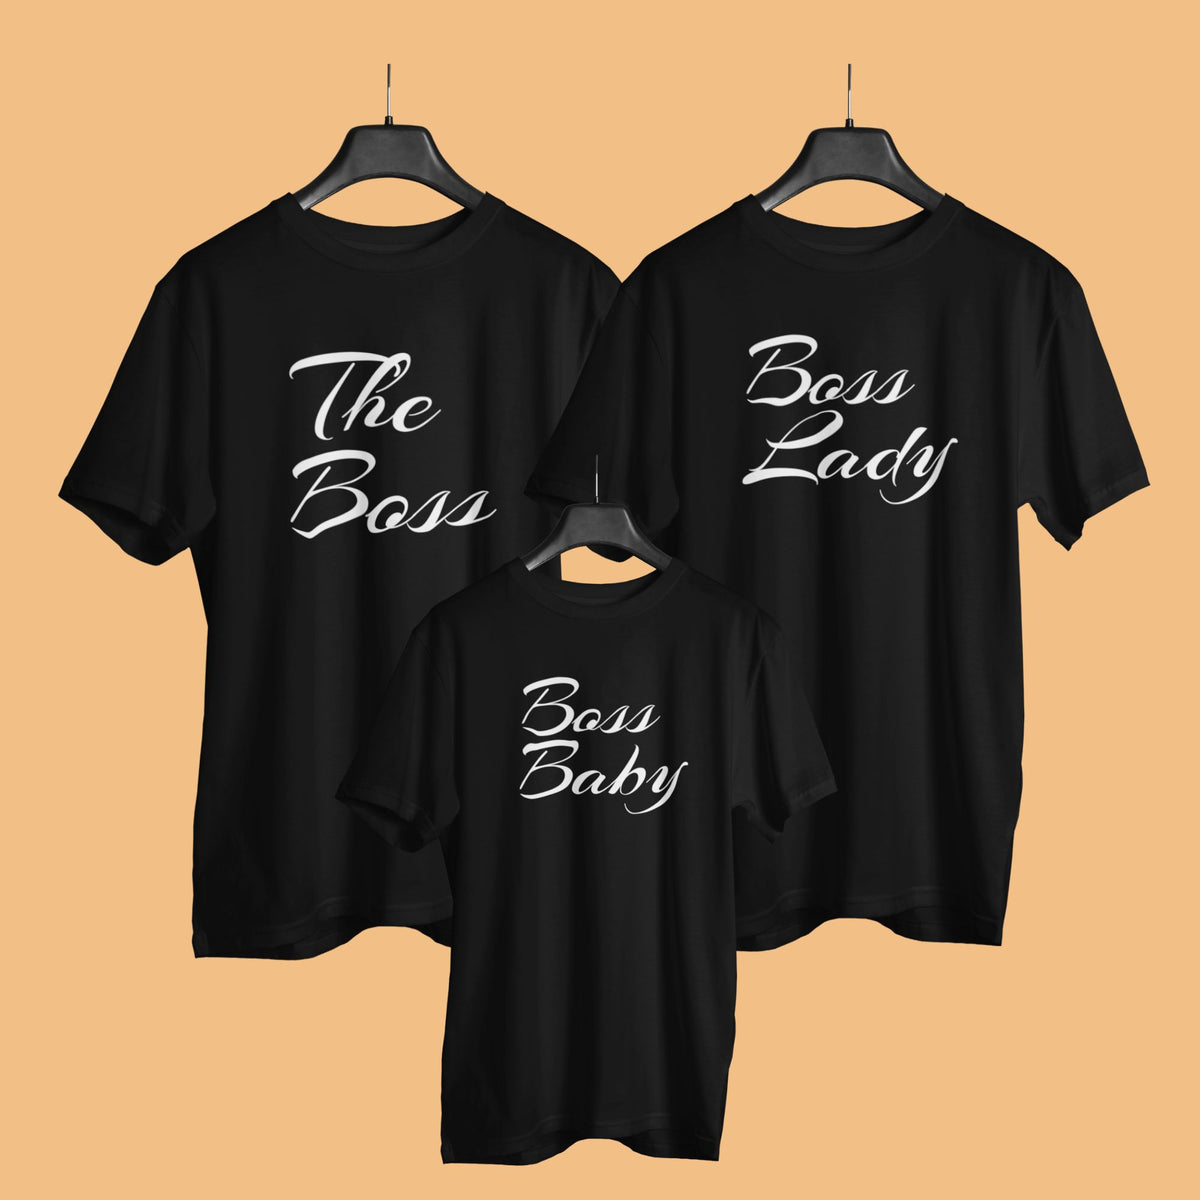 boss-lady-matching-family-black-t-shirts-for-mom-dad-son-daughter-gogirgit-hanger